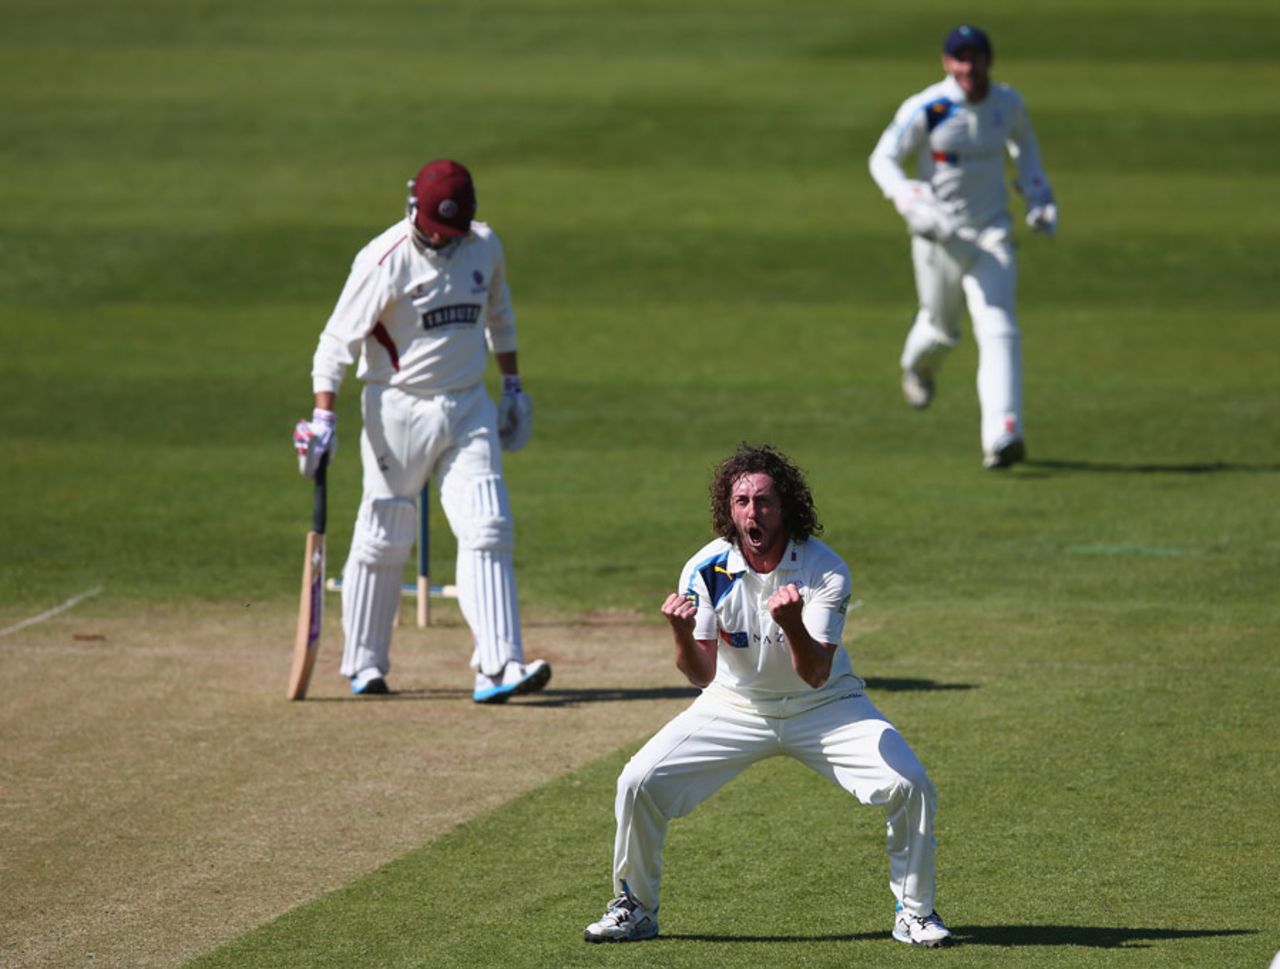 Ryan Sidebottom was very pleased to remove Marcus Trescothick, Somerset v Yorkshire, County Championship Division One, Taunton, 2nd day, April 14, 2014